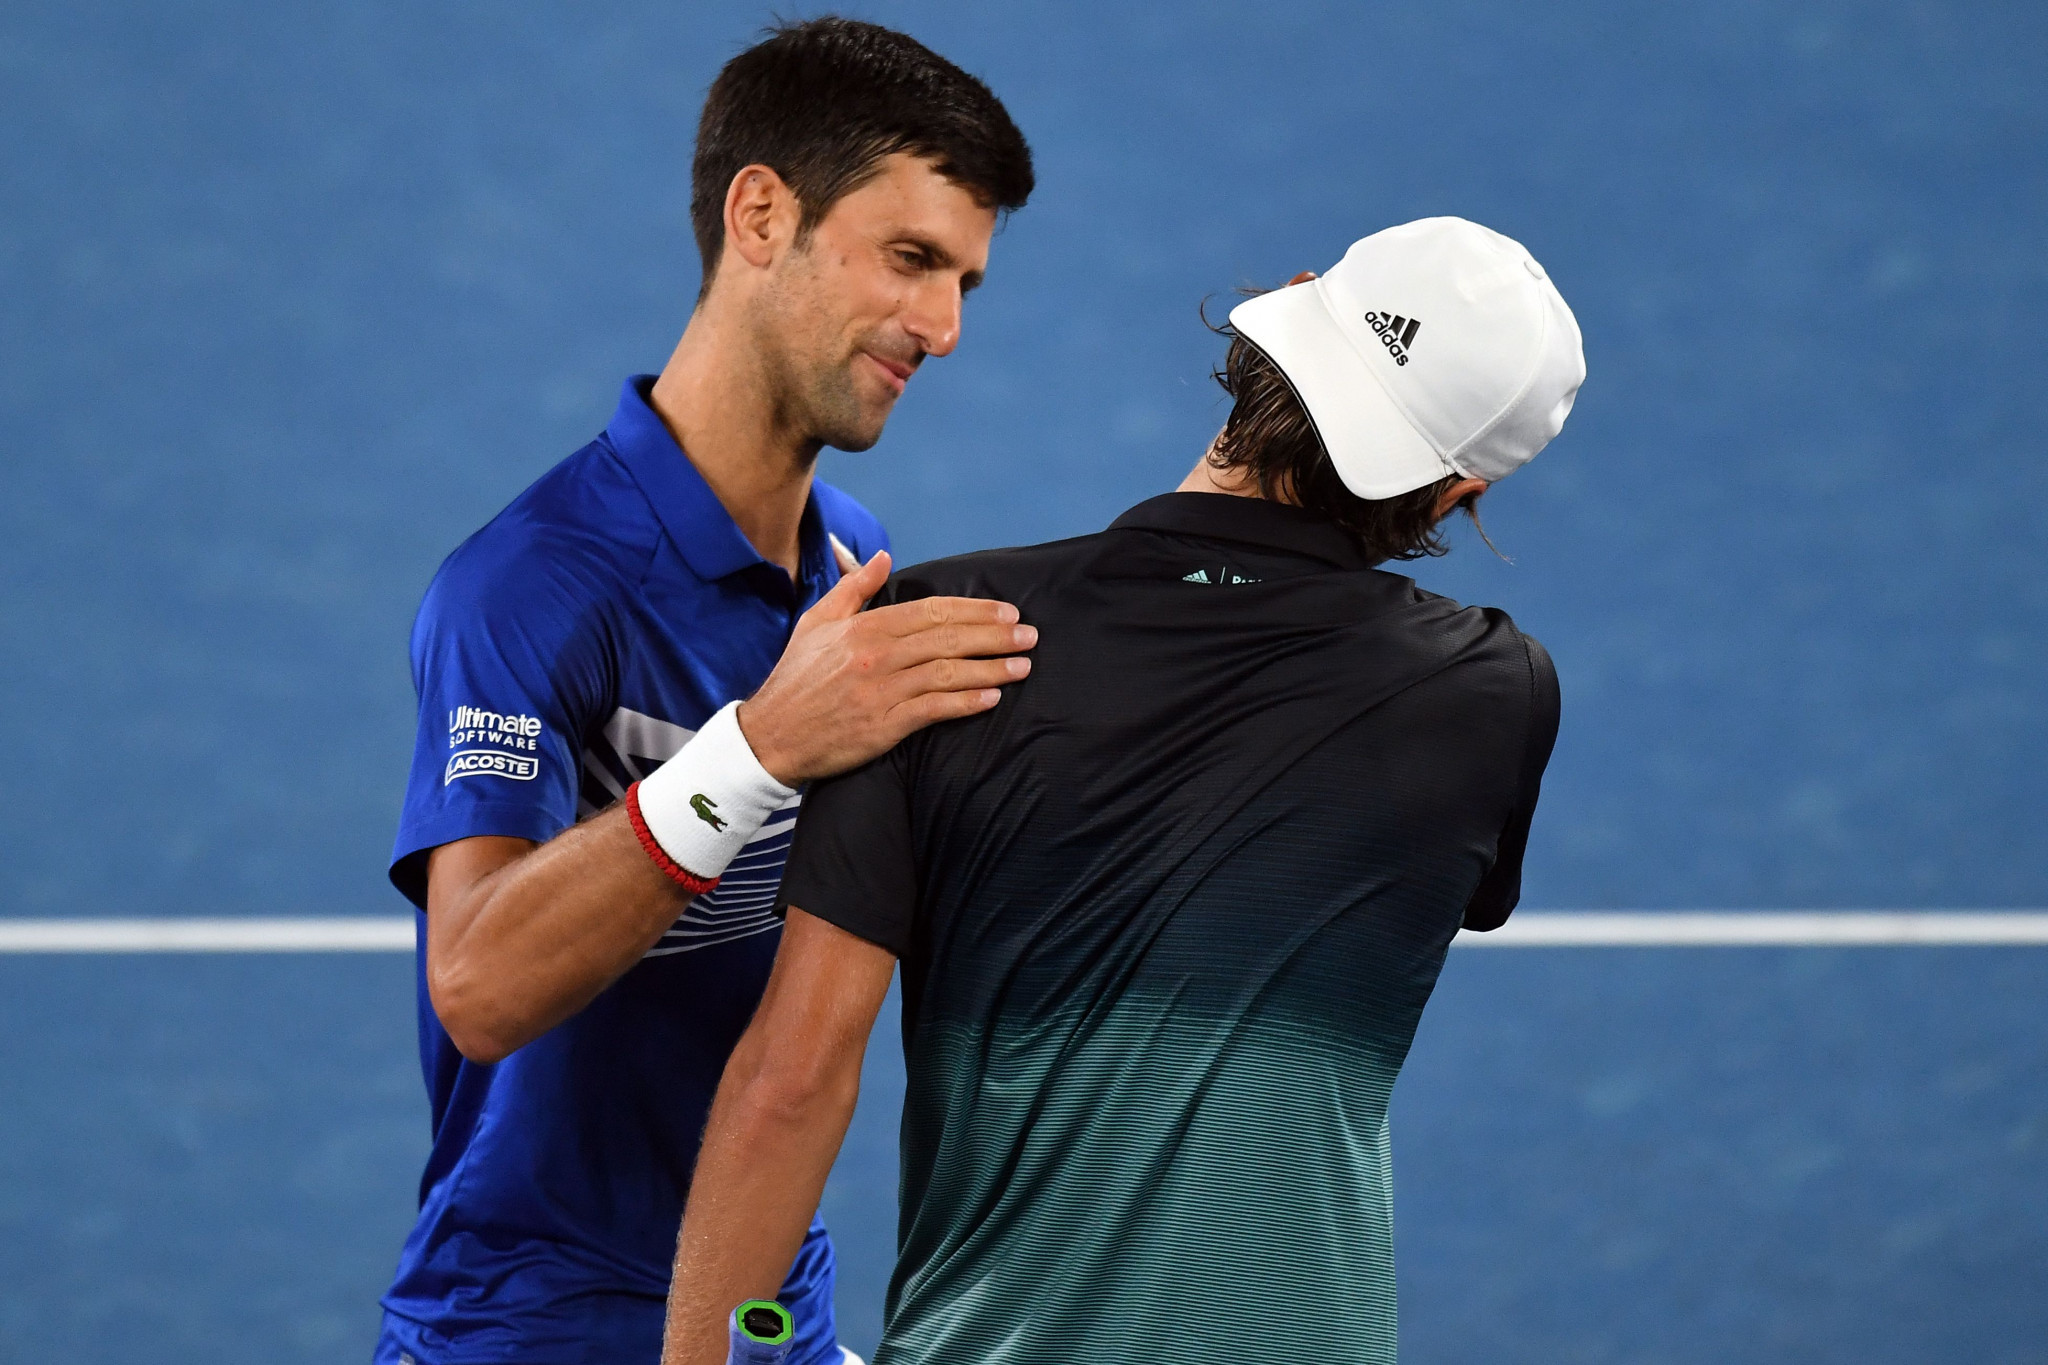 Novak Djokovic commiserated his beaten opponent following the tie ©Getty Images